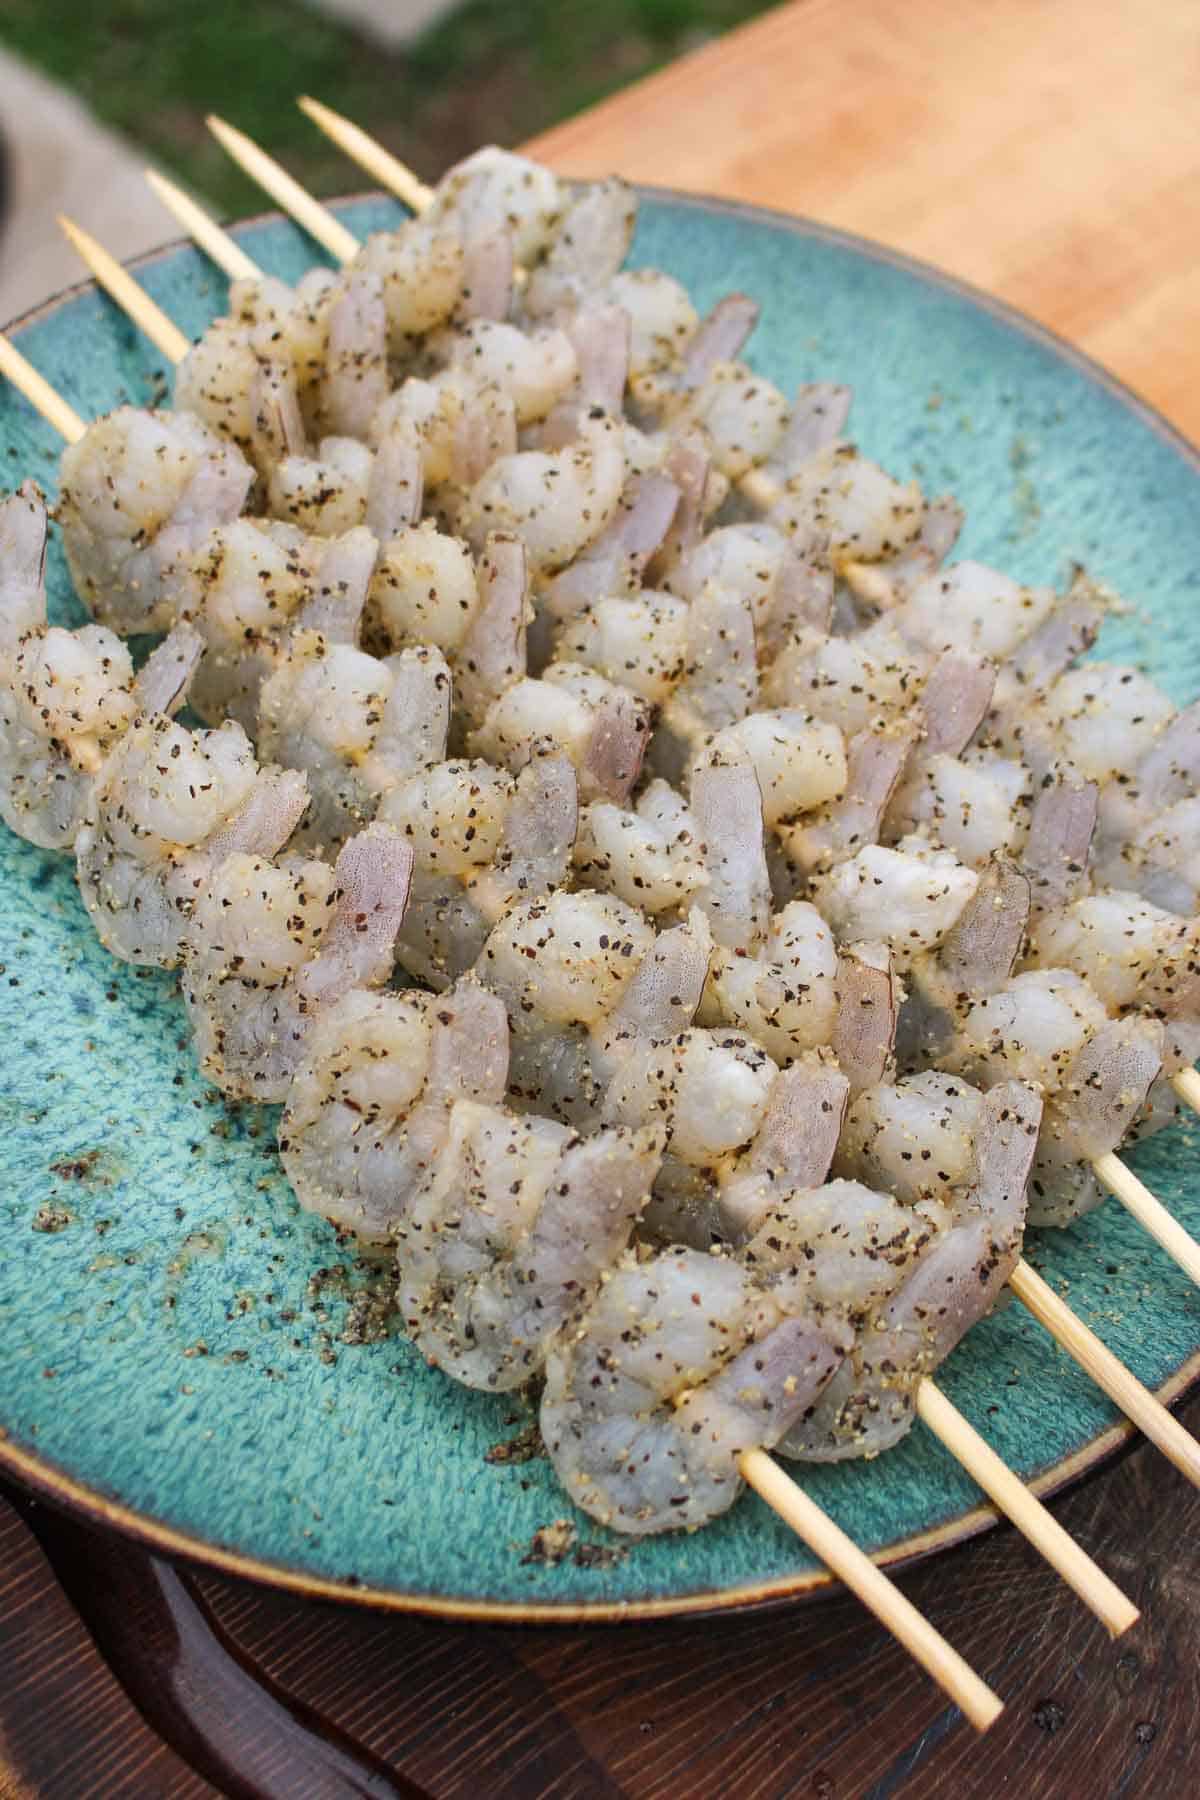 The raw shrimp placed on the wooden skewers.